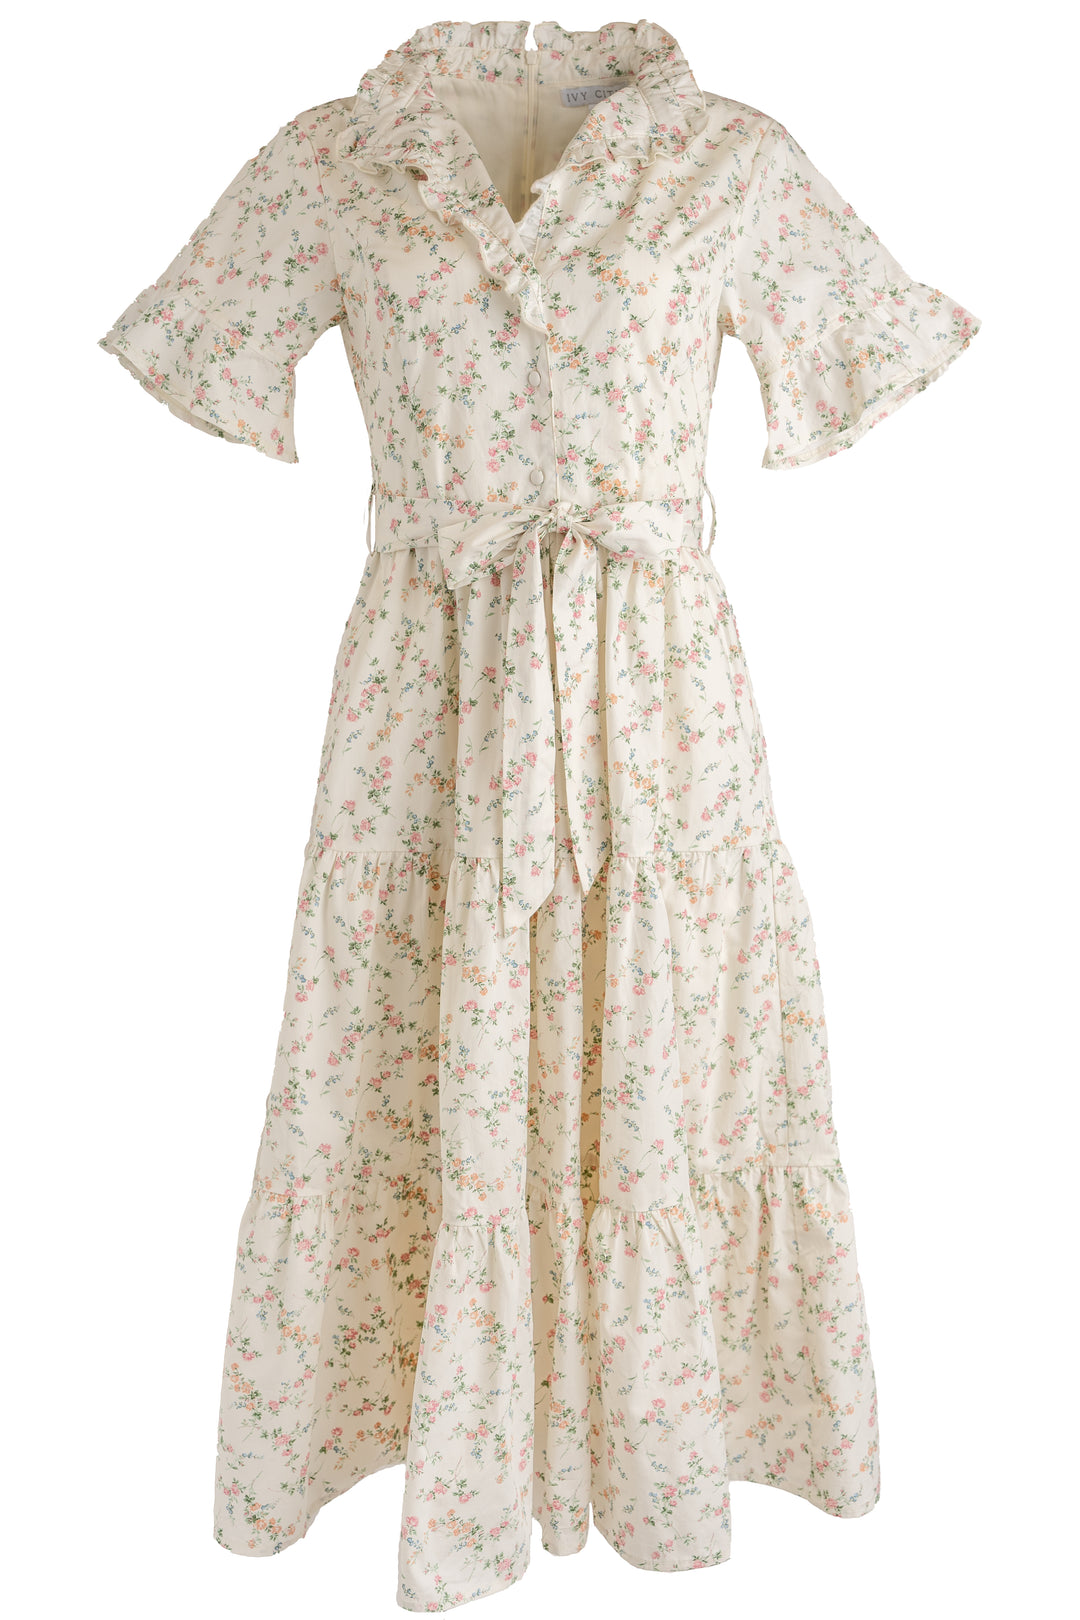 Sutton Dress Made With Liberty Fabric - FINAL SALE